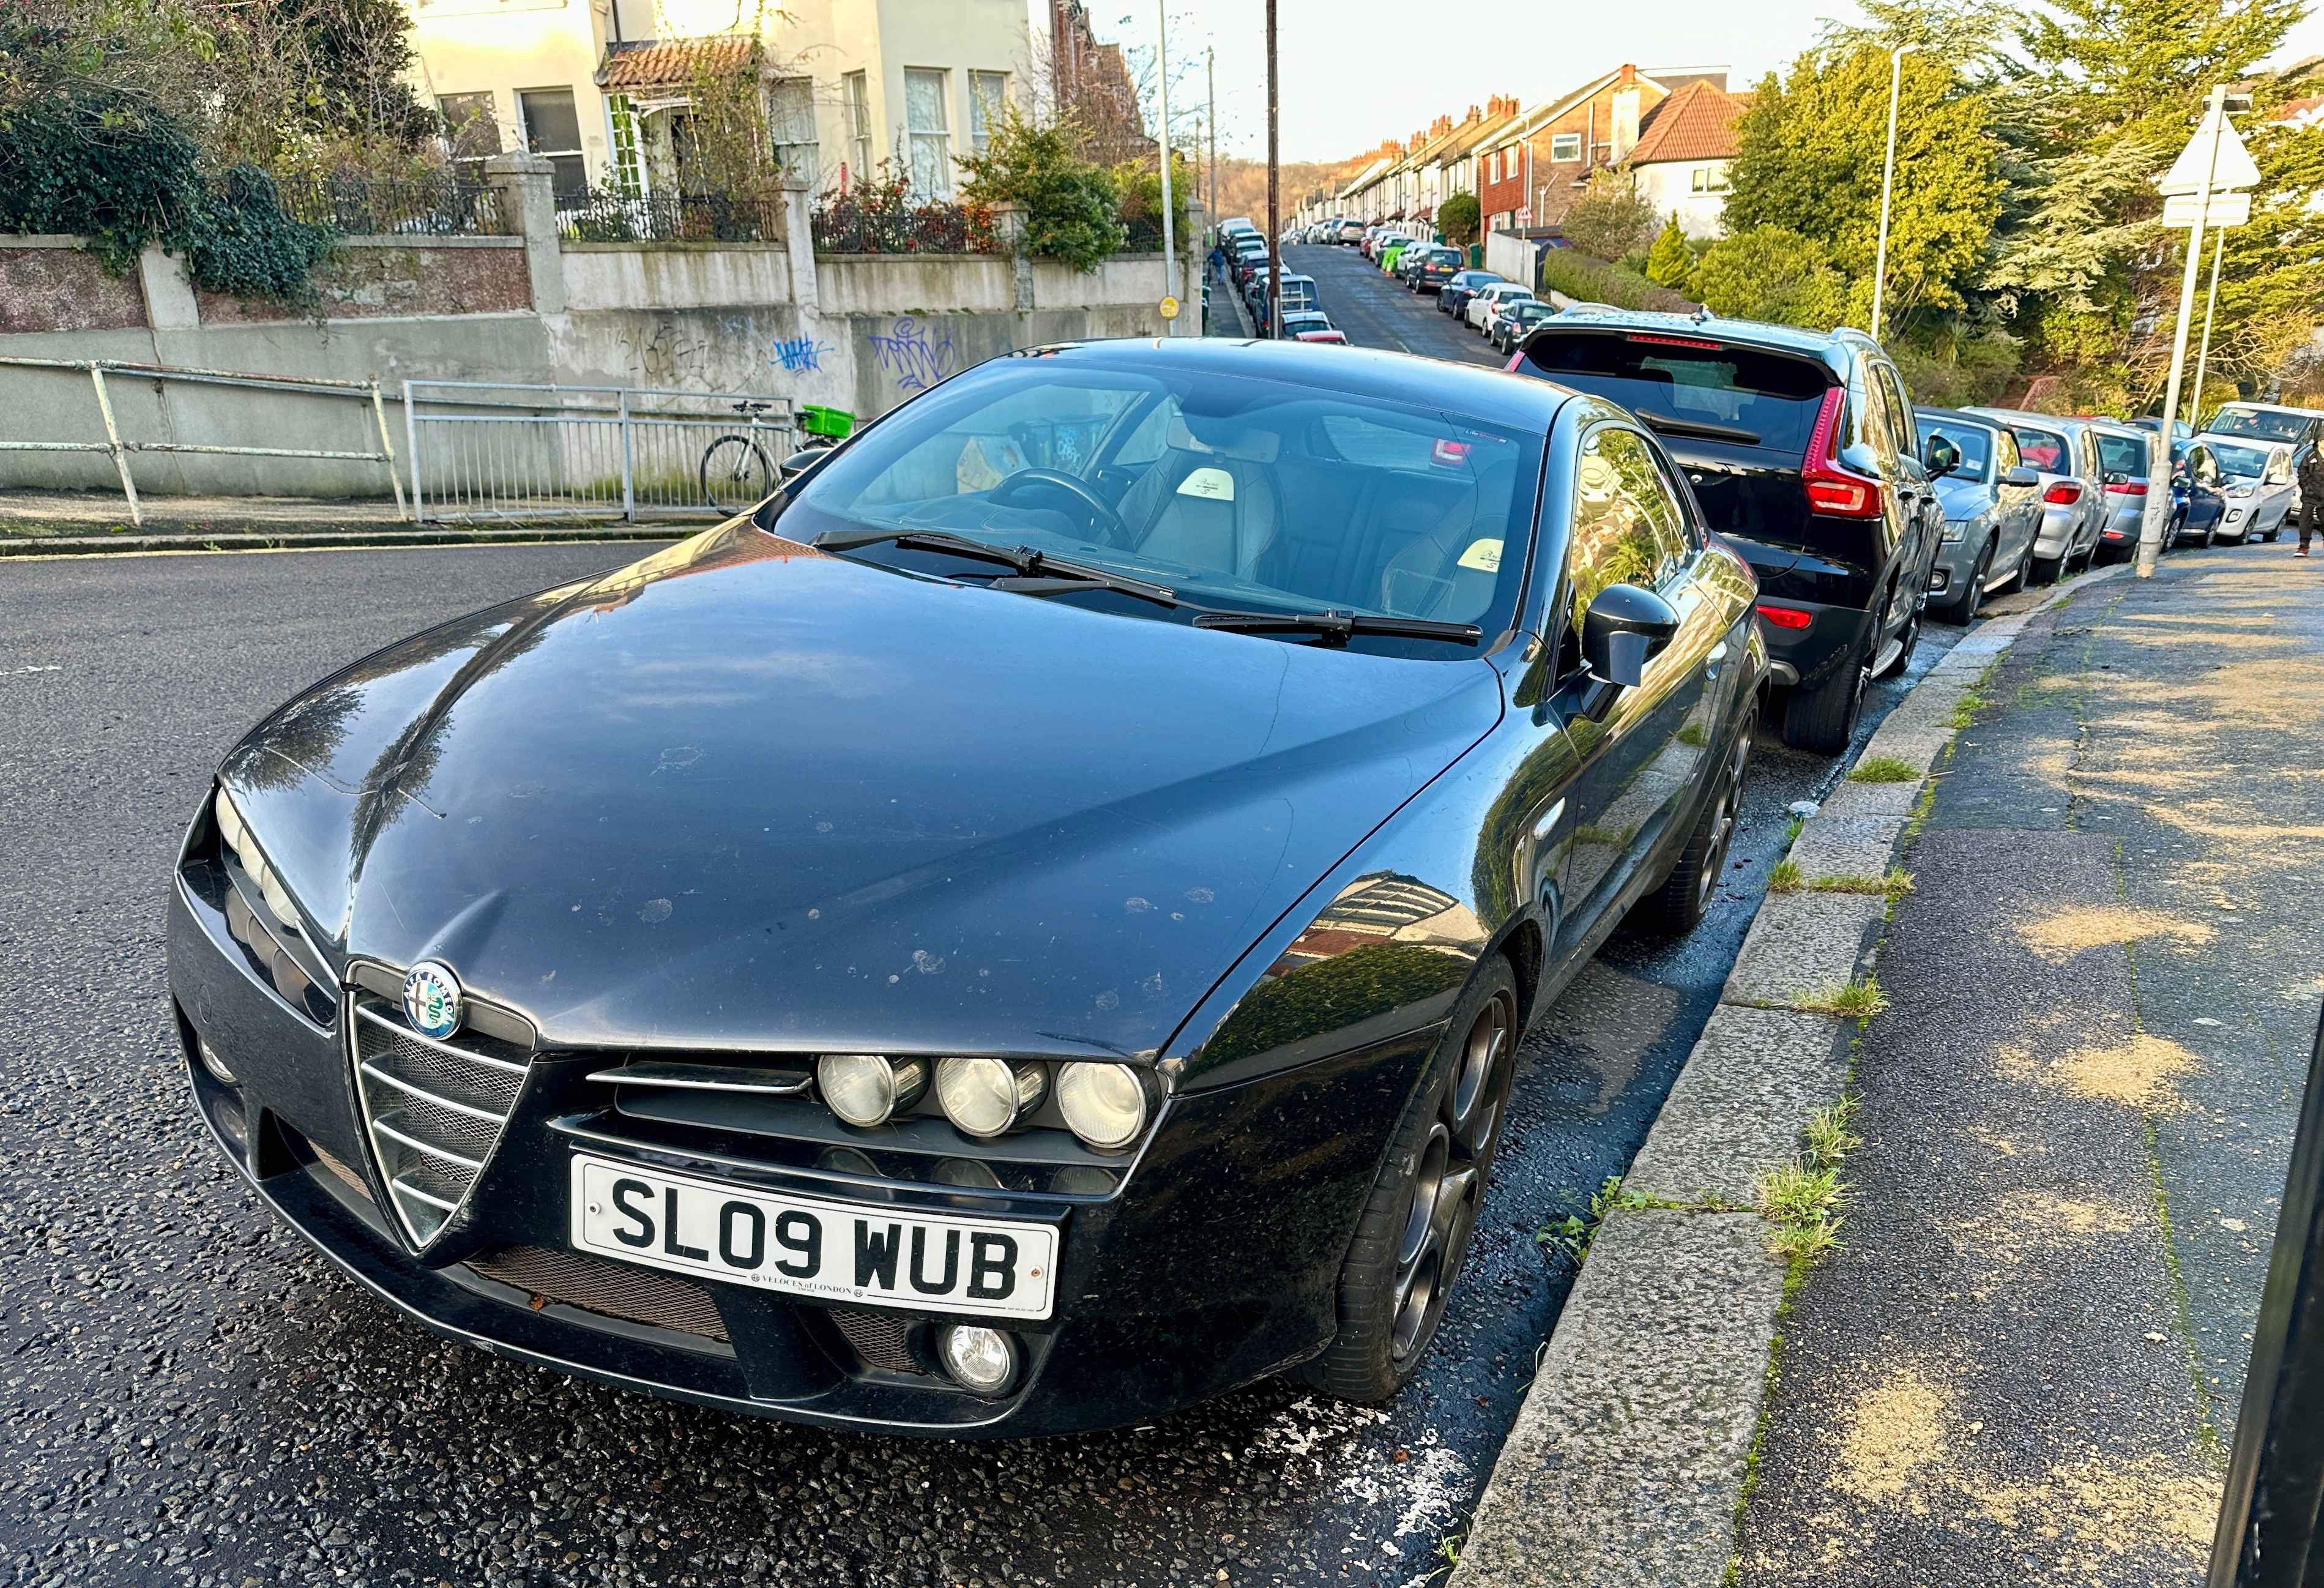 Photograph of SL09 WUB - a Black Alfa Romeo Brera parked in Hollingdean by a non-resident. The fourteenth of twenty photographs supplied by the residents of Hollingdean.